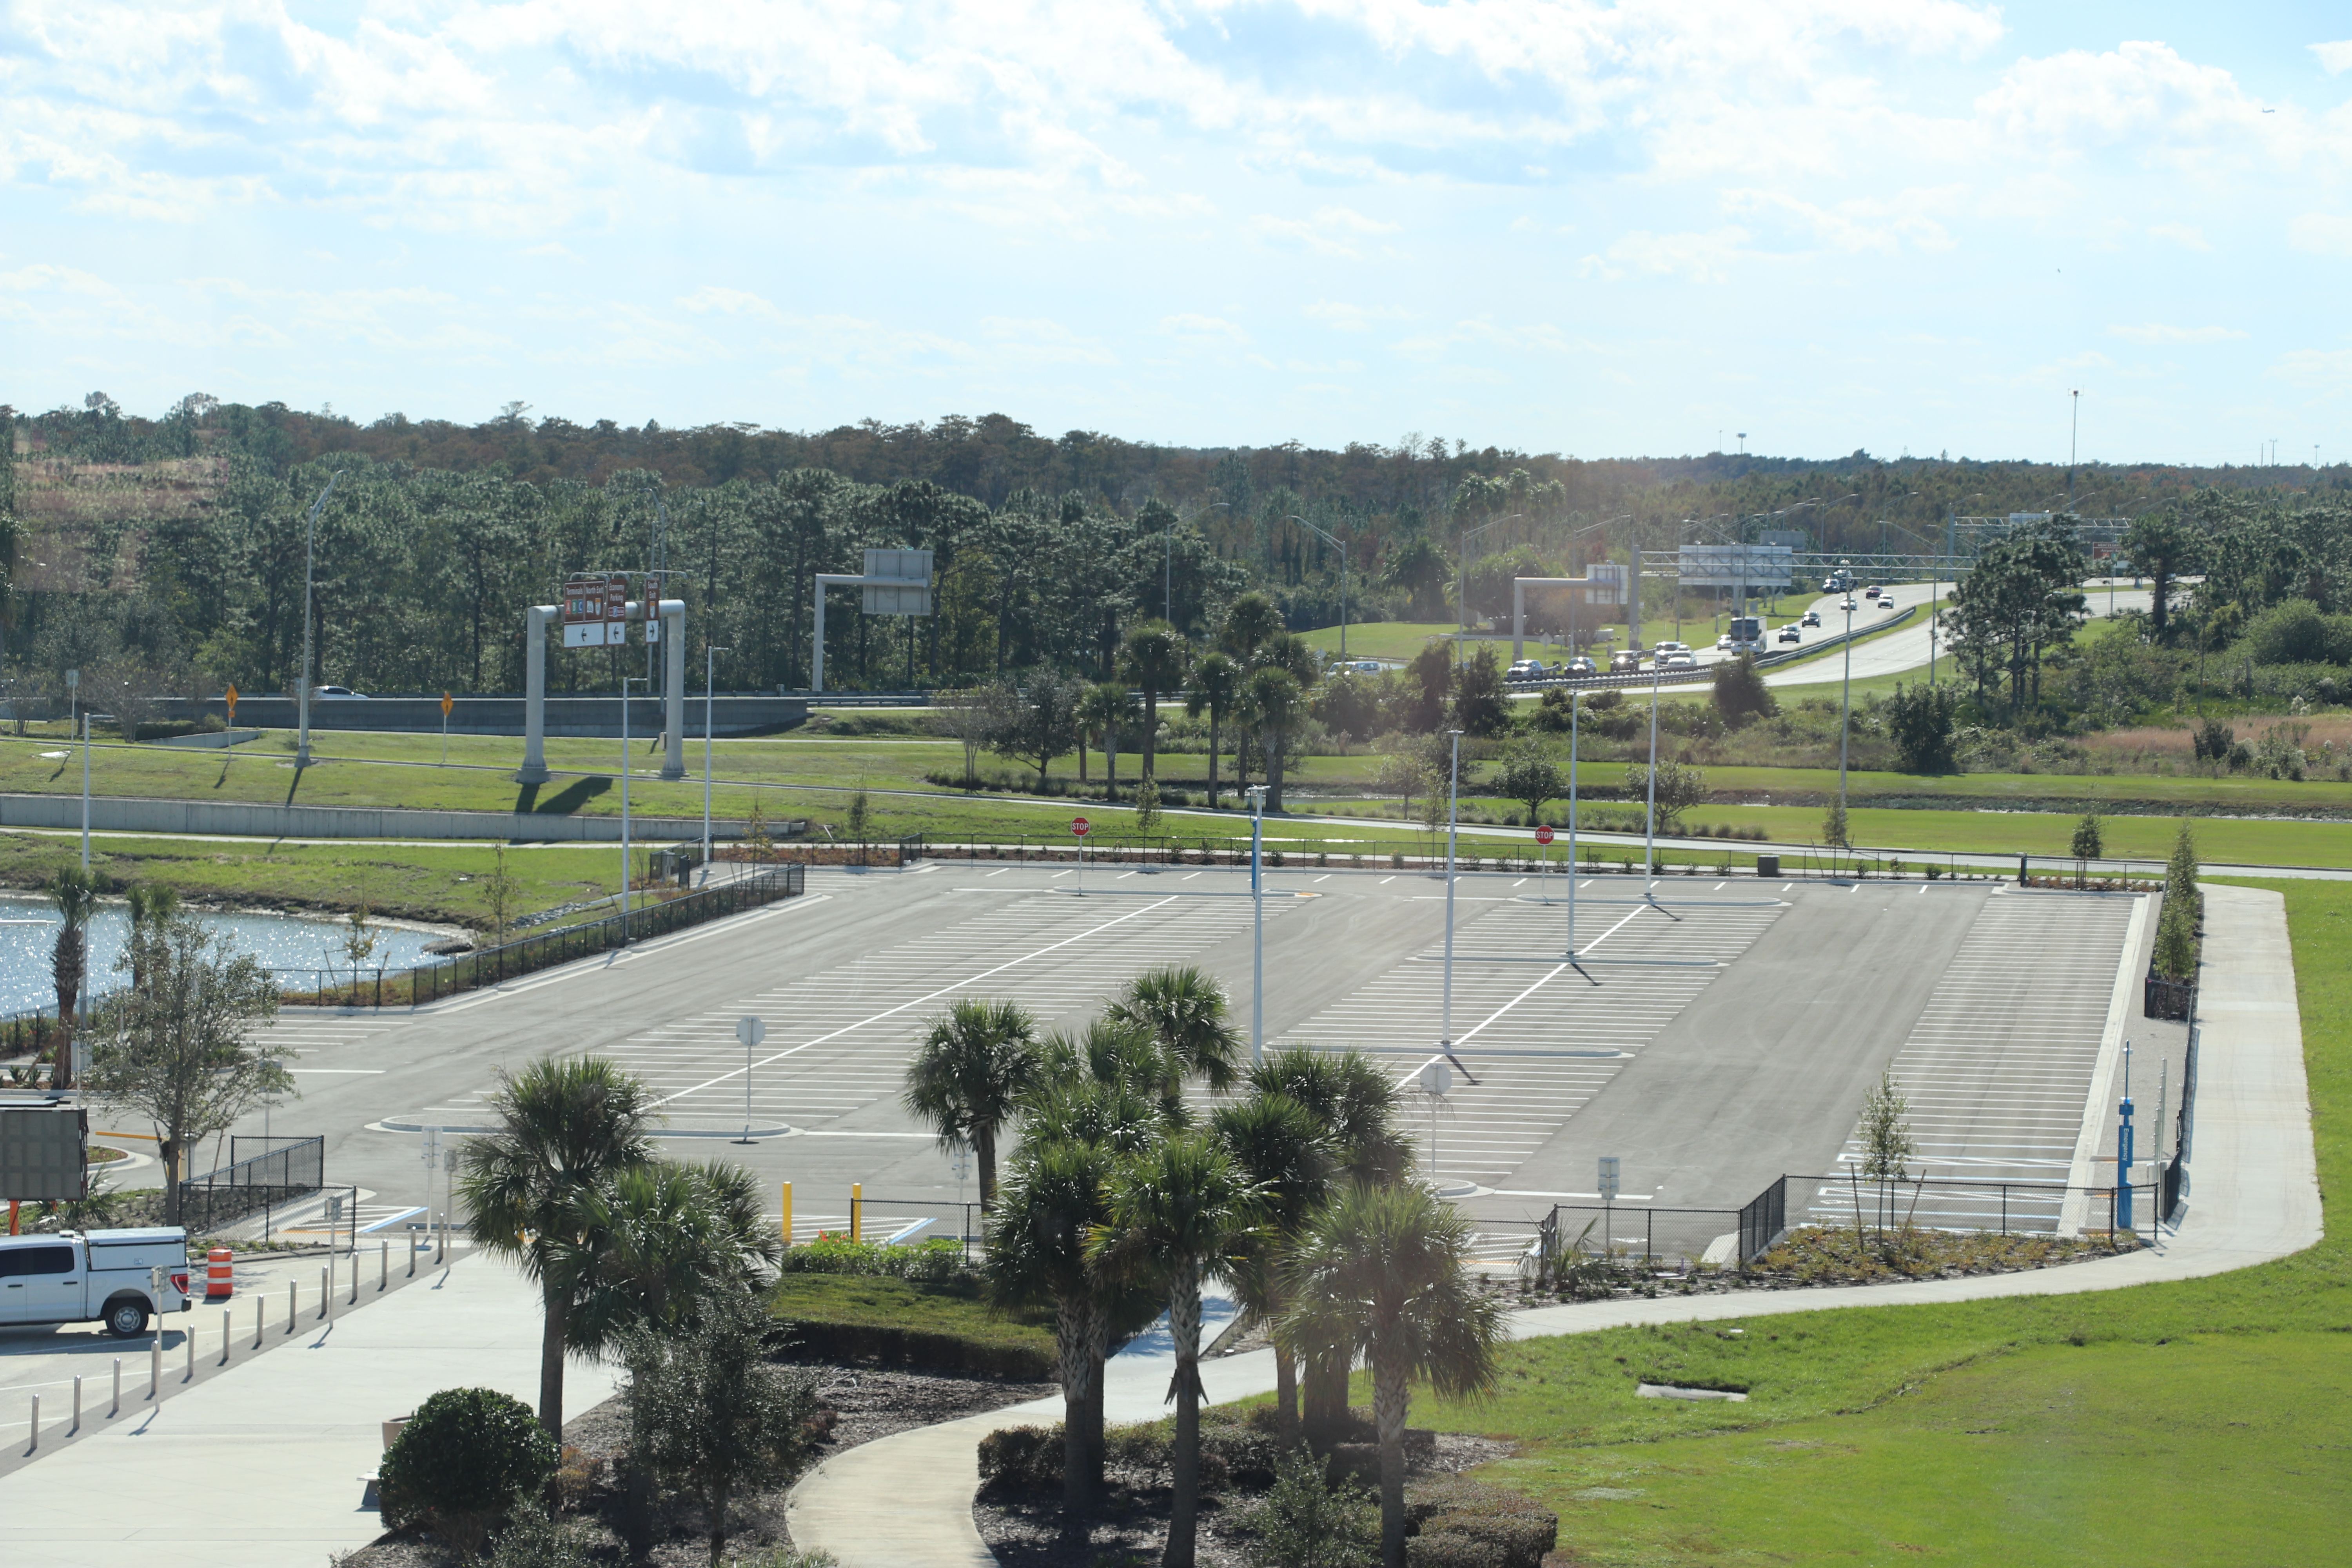 Orlando International Airport parking: What to know about price increases